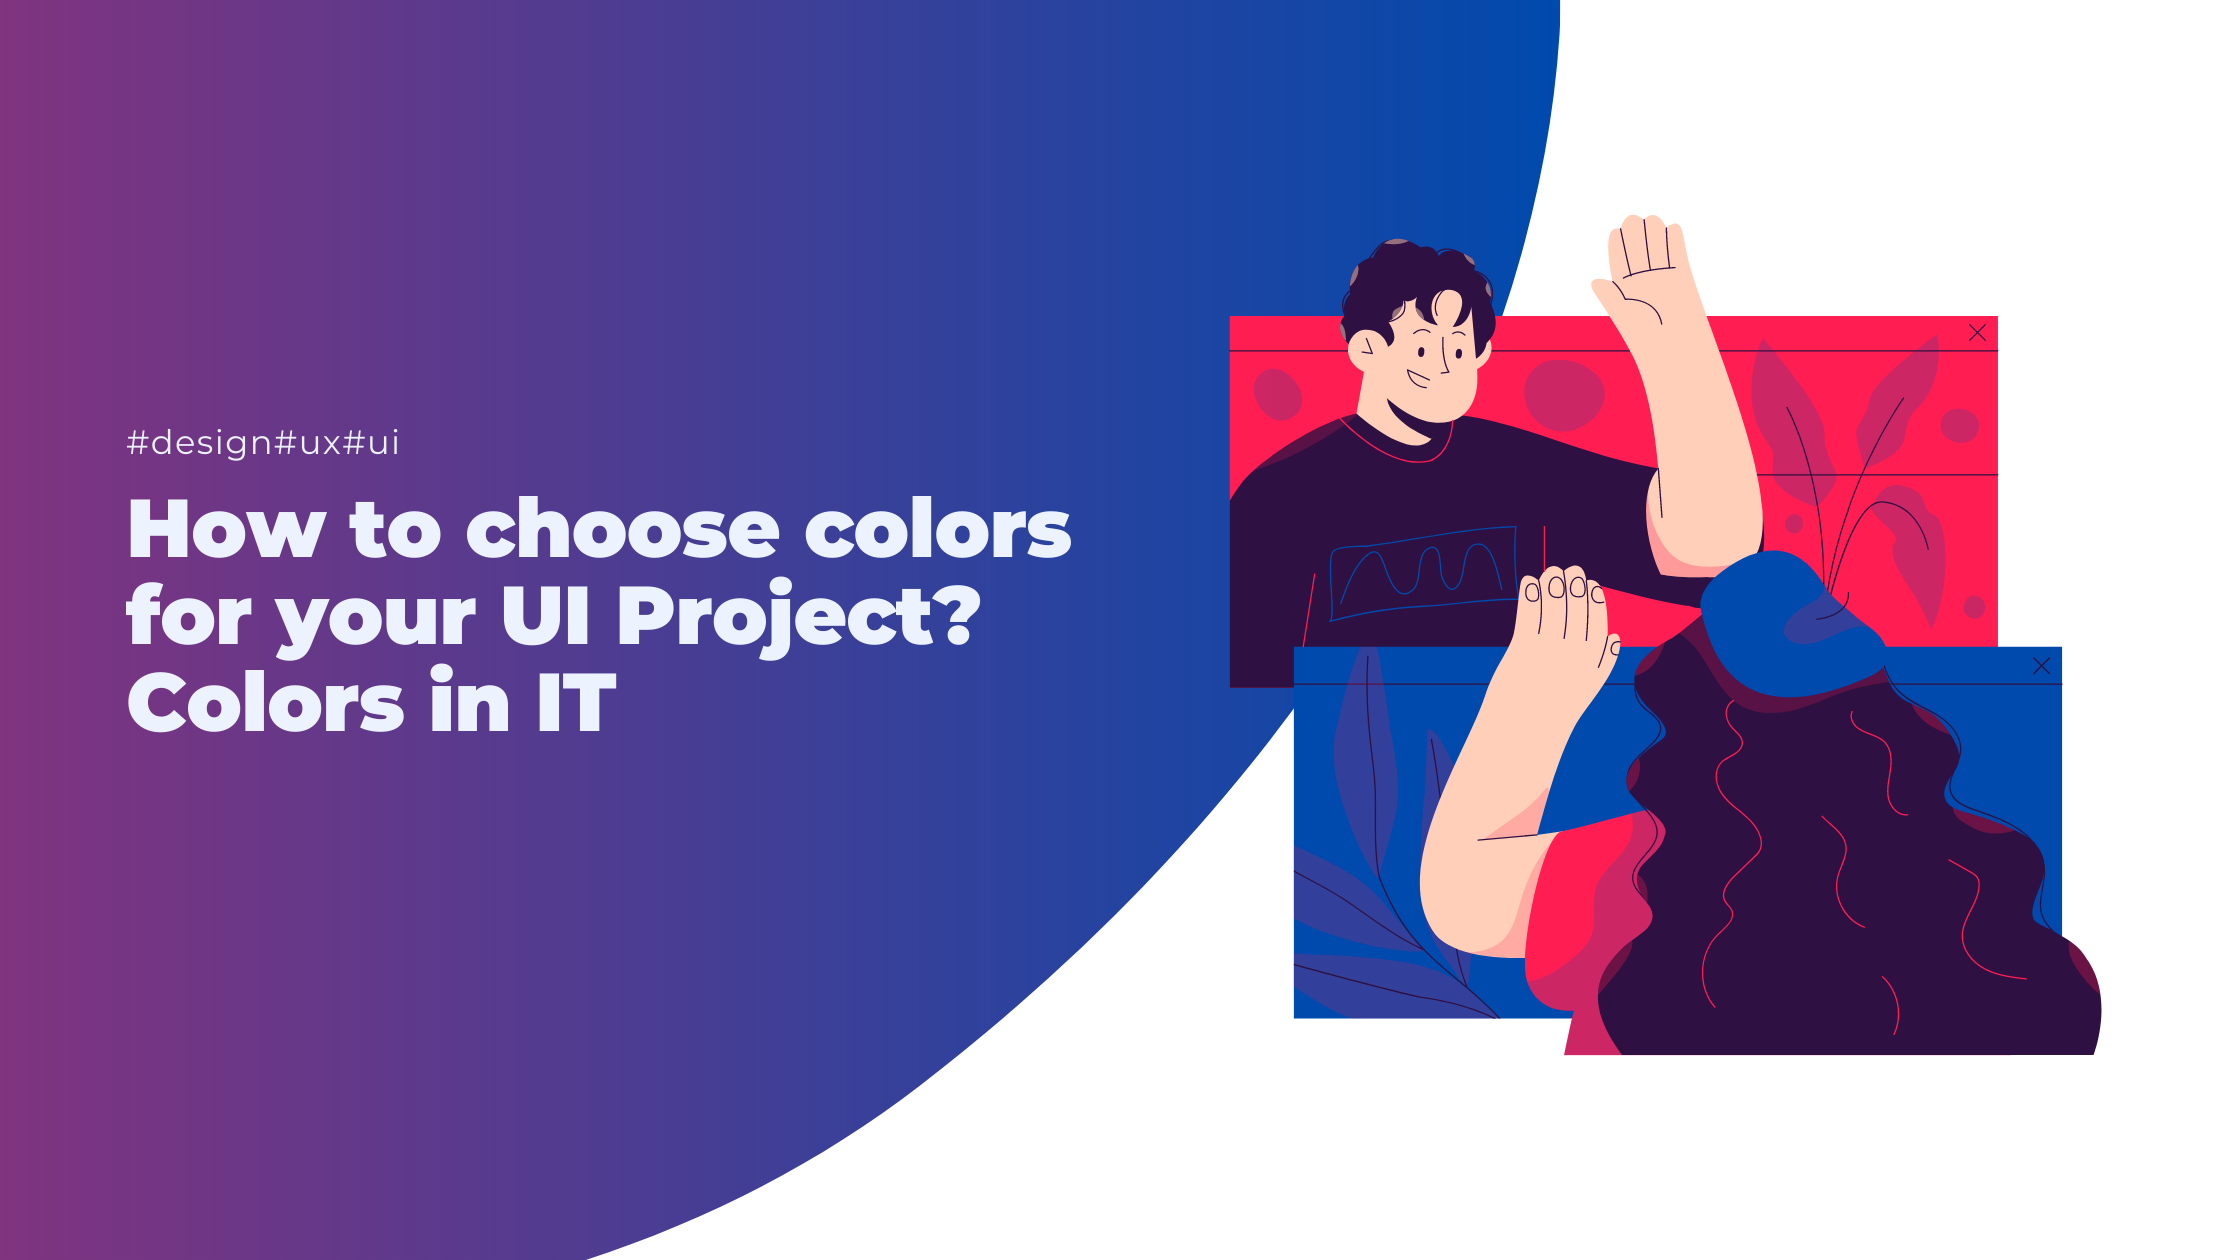 How to choose colors for your UI Project? Colors in IT